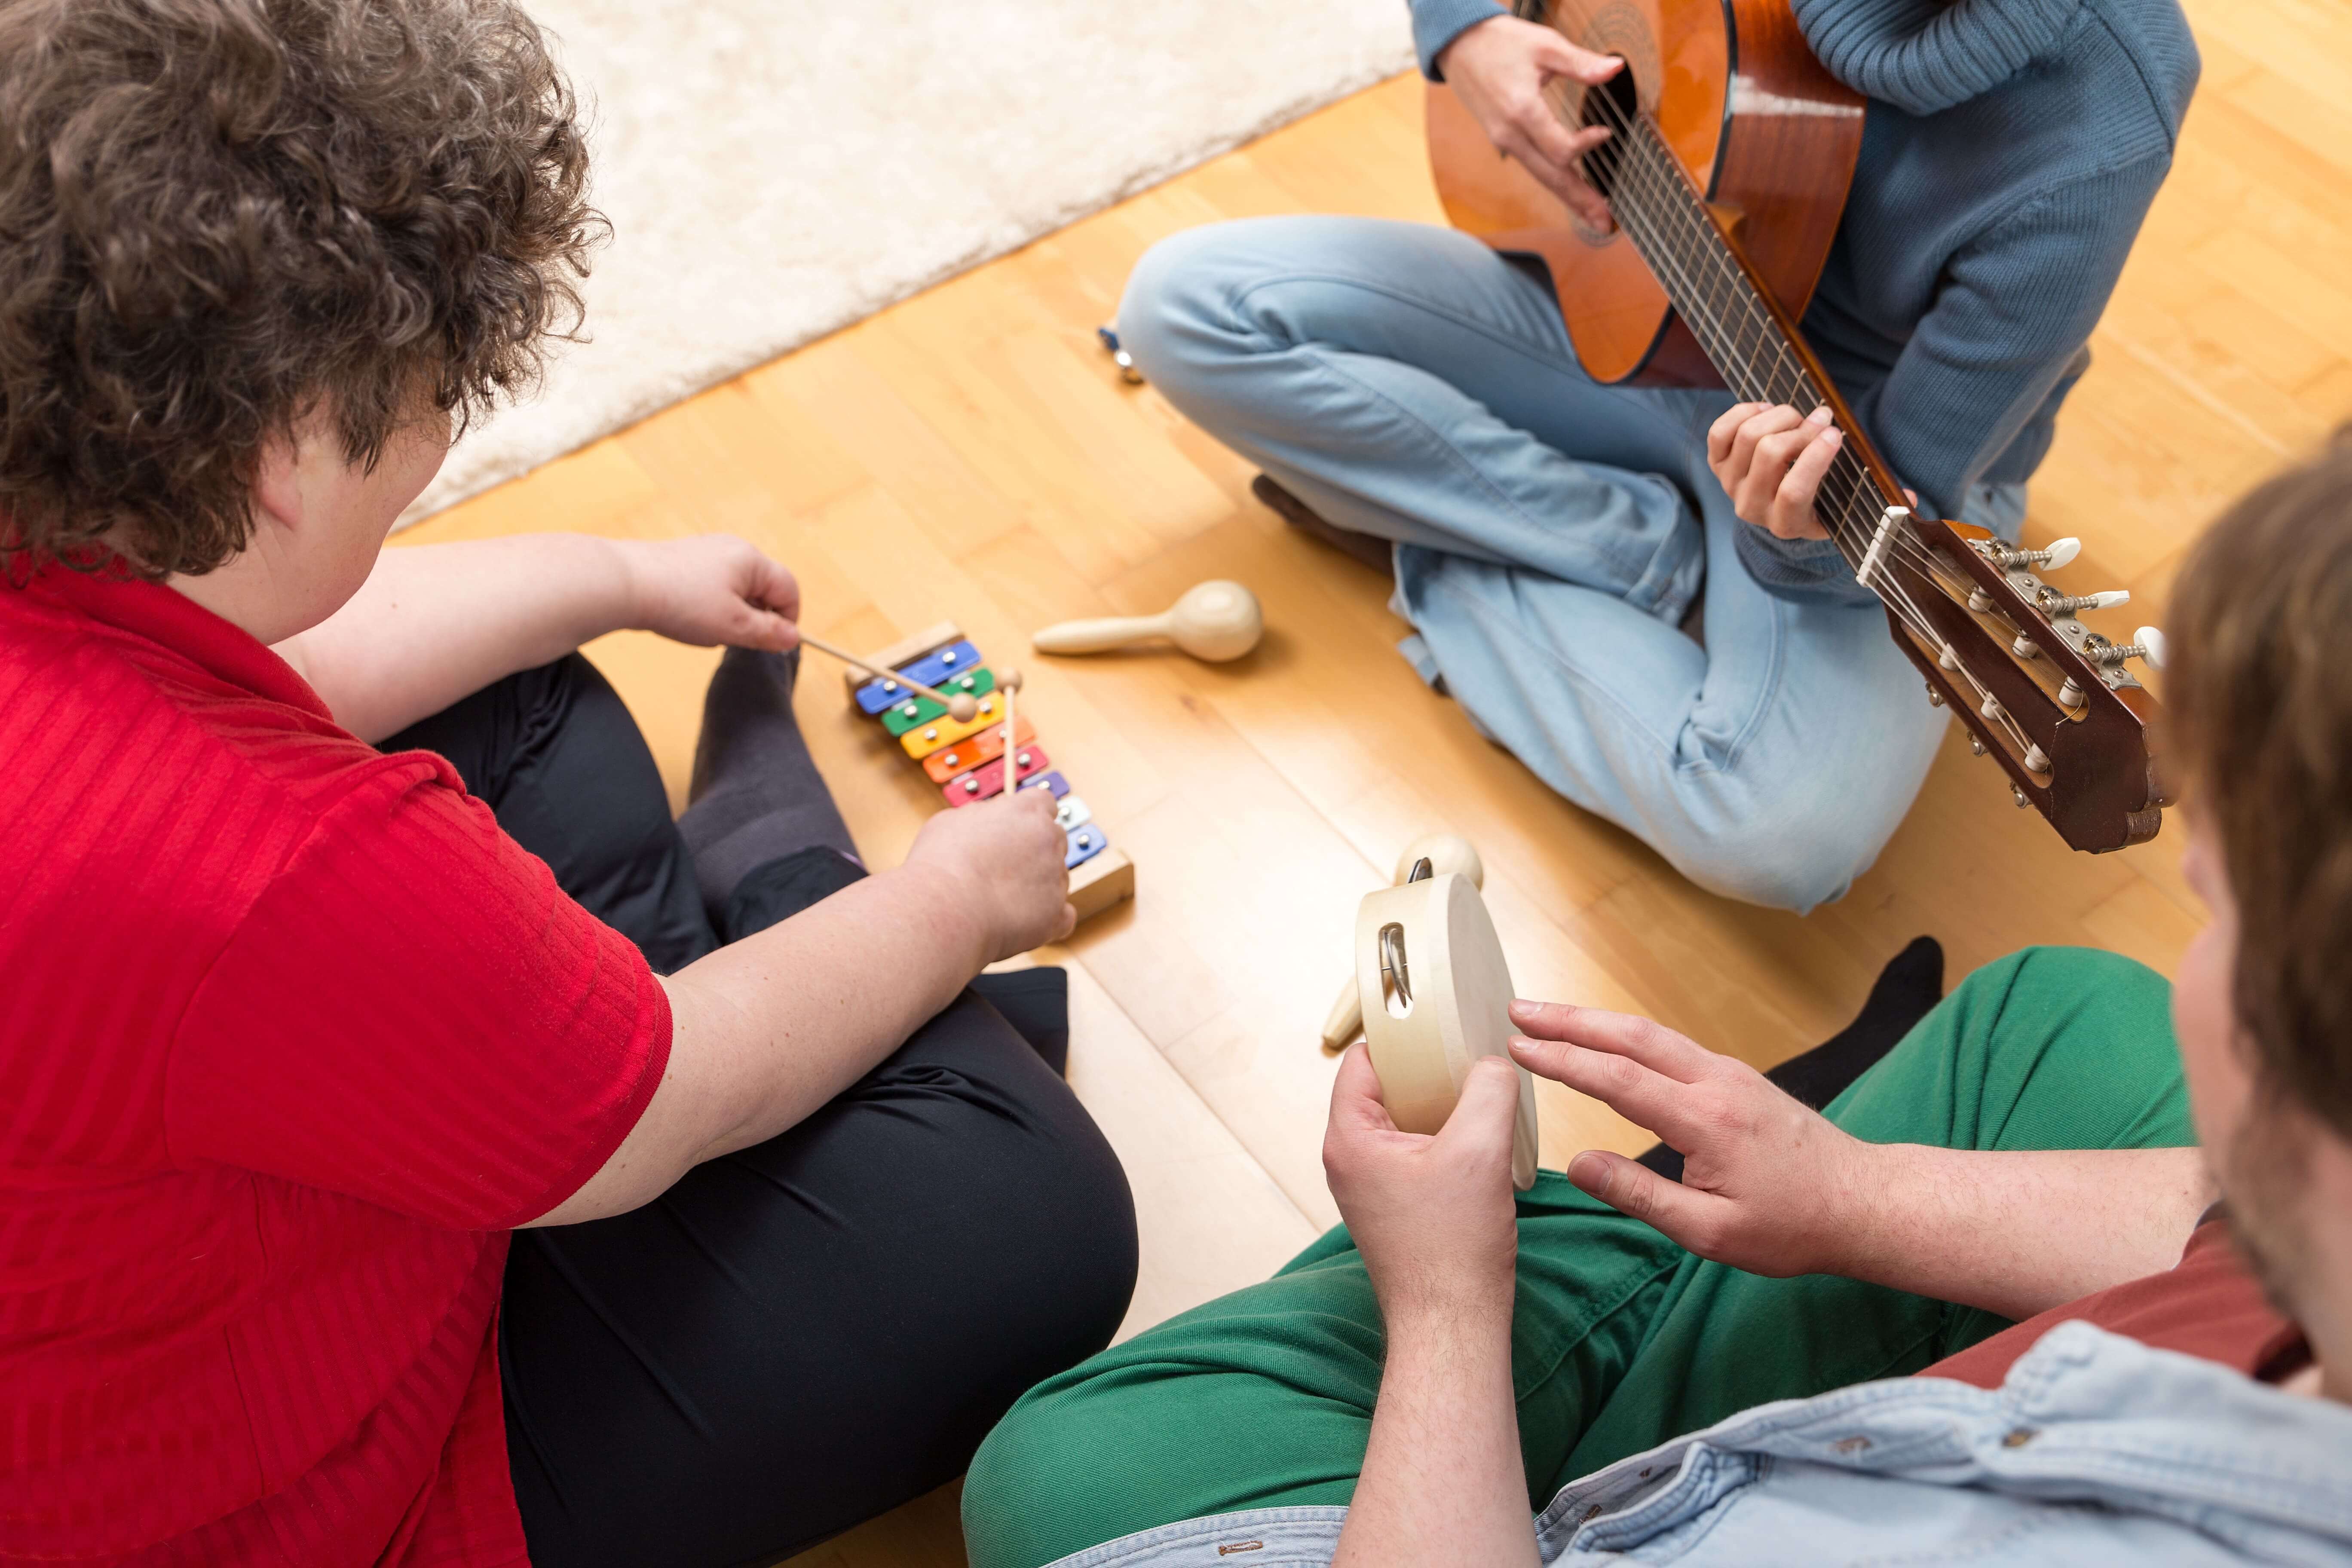 a group of people playing music